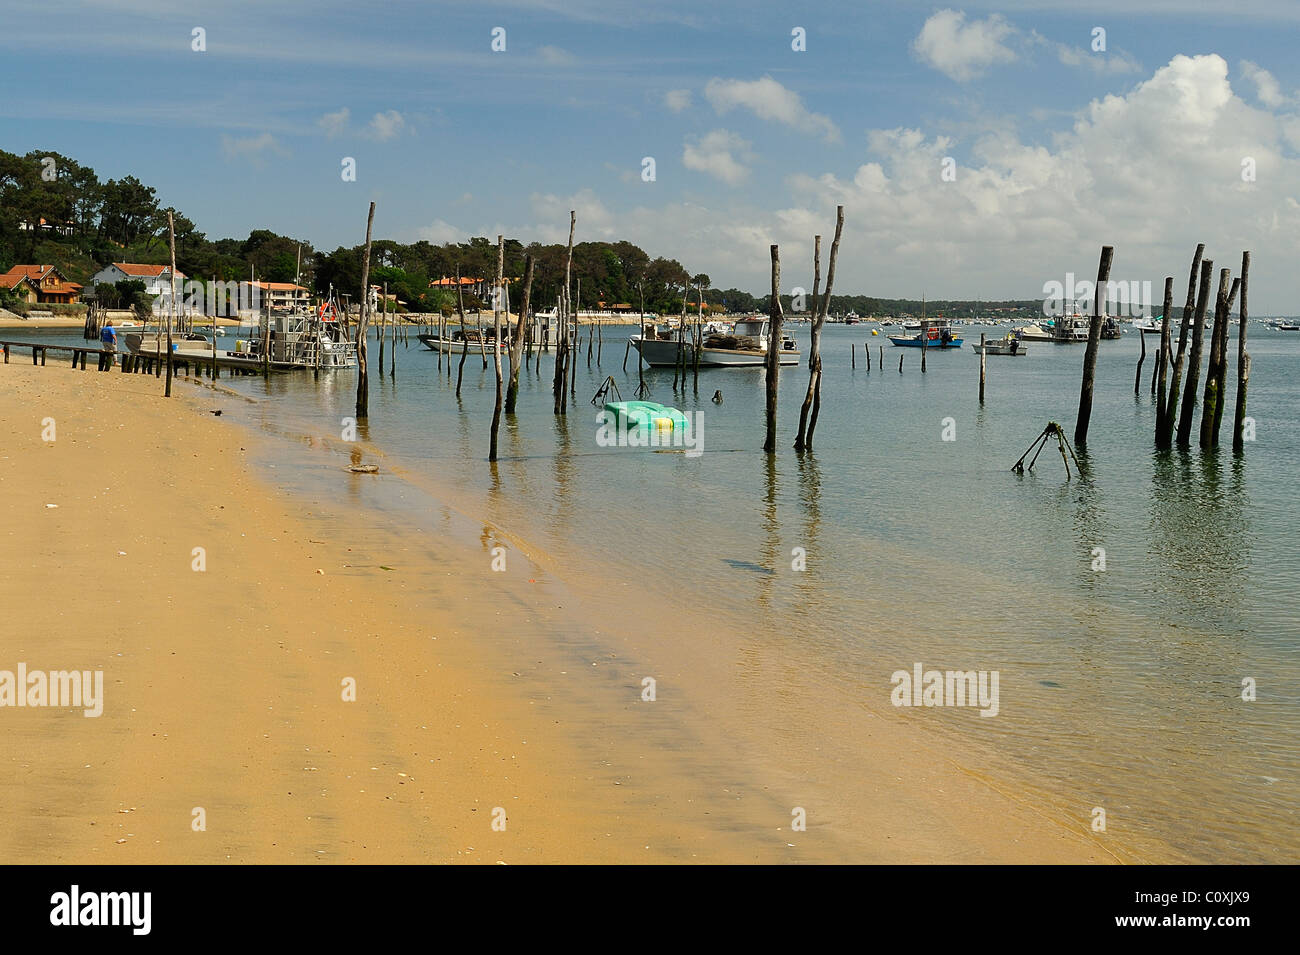 Shore front with poles showing oyster harvesting beds in Cap Ferret, Arcachon bay, department of Gironde, France Stock Photo